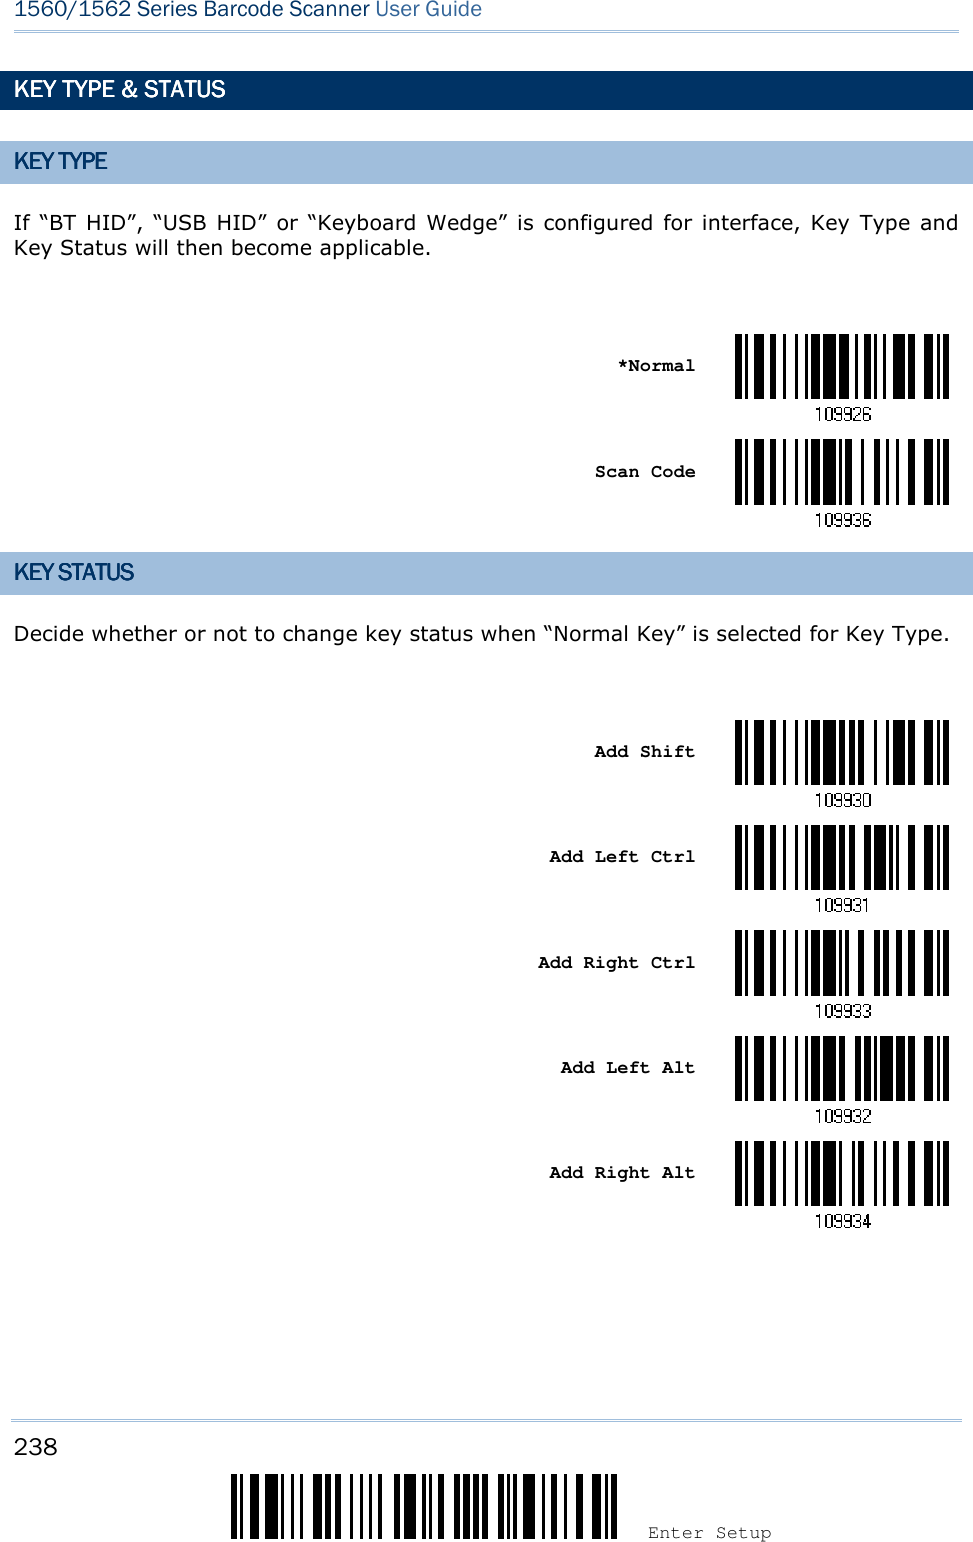 238 Enter Setup 1560/1562 Series Barcode Scanner User Guide  KEY TYPEKEY TYPEKEY TYPEKEY TYPE    &amp; STATUS&amp; STATUS&amp; STATUS&amp; STATUS    KEY TYPEKEY TYPEKEY TYPEKEY TYPE    If “BT  HID”, “USB  HID”  or  “Keyboard  Wedge” is configured for interface, Key  Type  and Key Status will then become applicable.     *Normal     Scan Code  KEY STATUSKEY STATUSKEY STATUSKEY STATUS    Decide whether or not to change key status when “Normal Key” is selected for Key Type.     Add Shift     Add Left Ctrl     Add Right Ctrl     Add Left Alt     Add Right Alt    